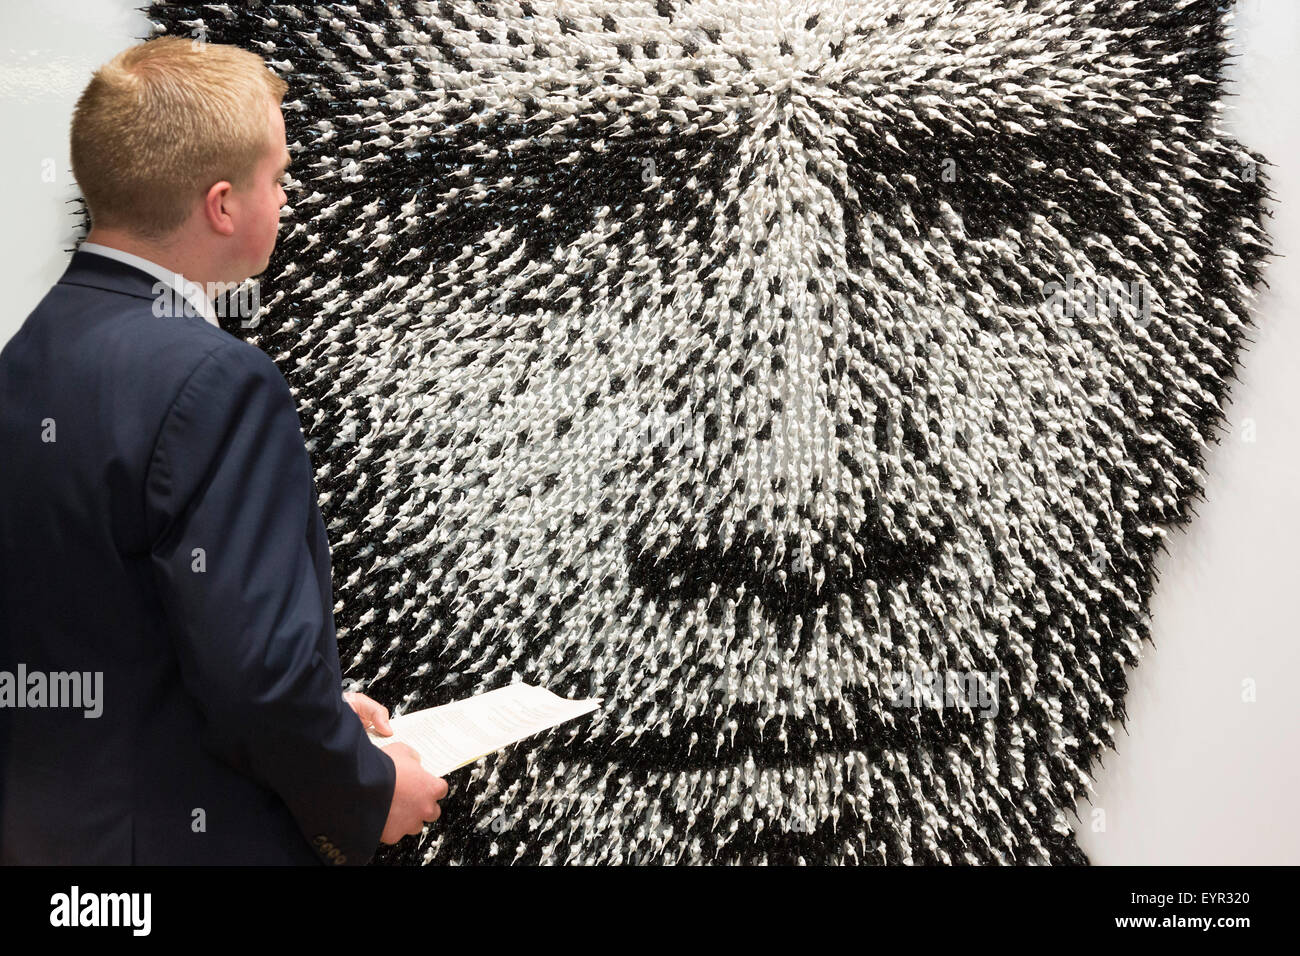 London, UK. 3 August 2015. Barack Obama portrait 'Shoot to Kill' by Joe Black, made of 11,000 toy soldiers. On 10 September 2015 Christie's South Kensington will hold the third annual 'Out of the Ordinary' auction, celebrating all things extraordiary and unusual - from a massive T-Rex to a portrait of Barack Obama made of toys. The preview marks the start of a free five-week summer exhibition, opening to the public on 3 August 2015. Photo: ukartpics/Alamy Live News Stock Photo